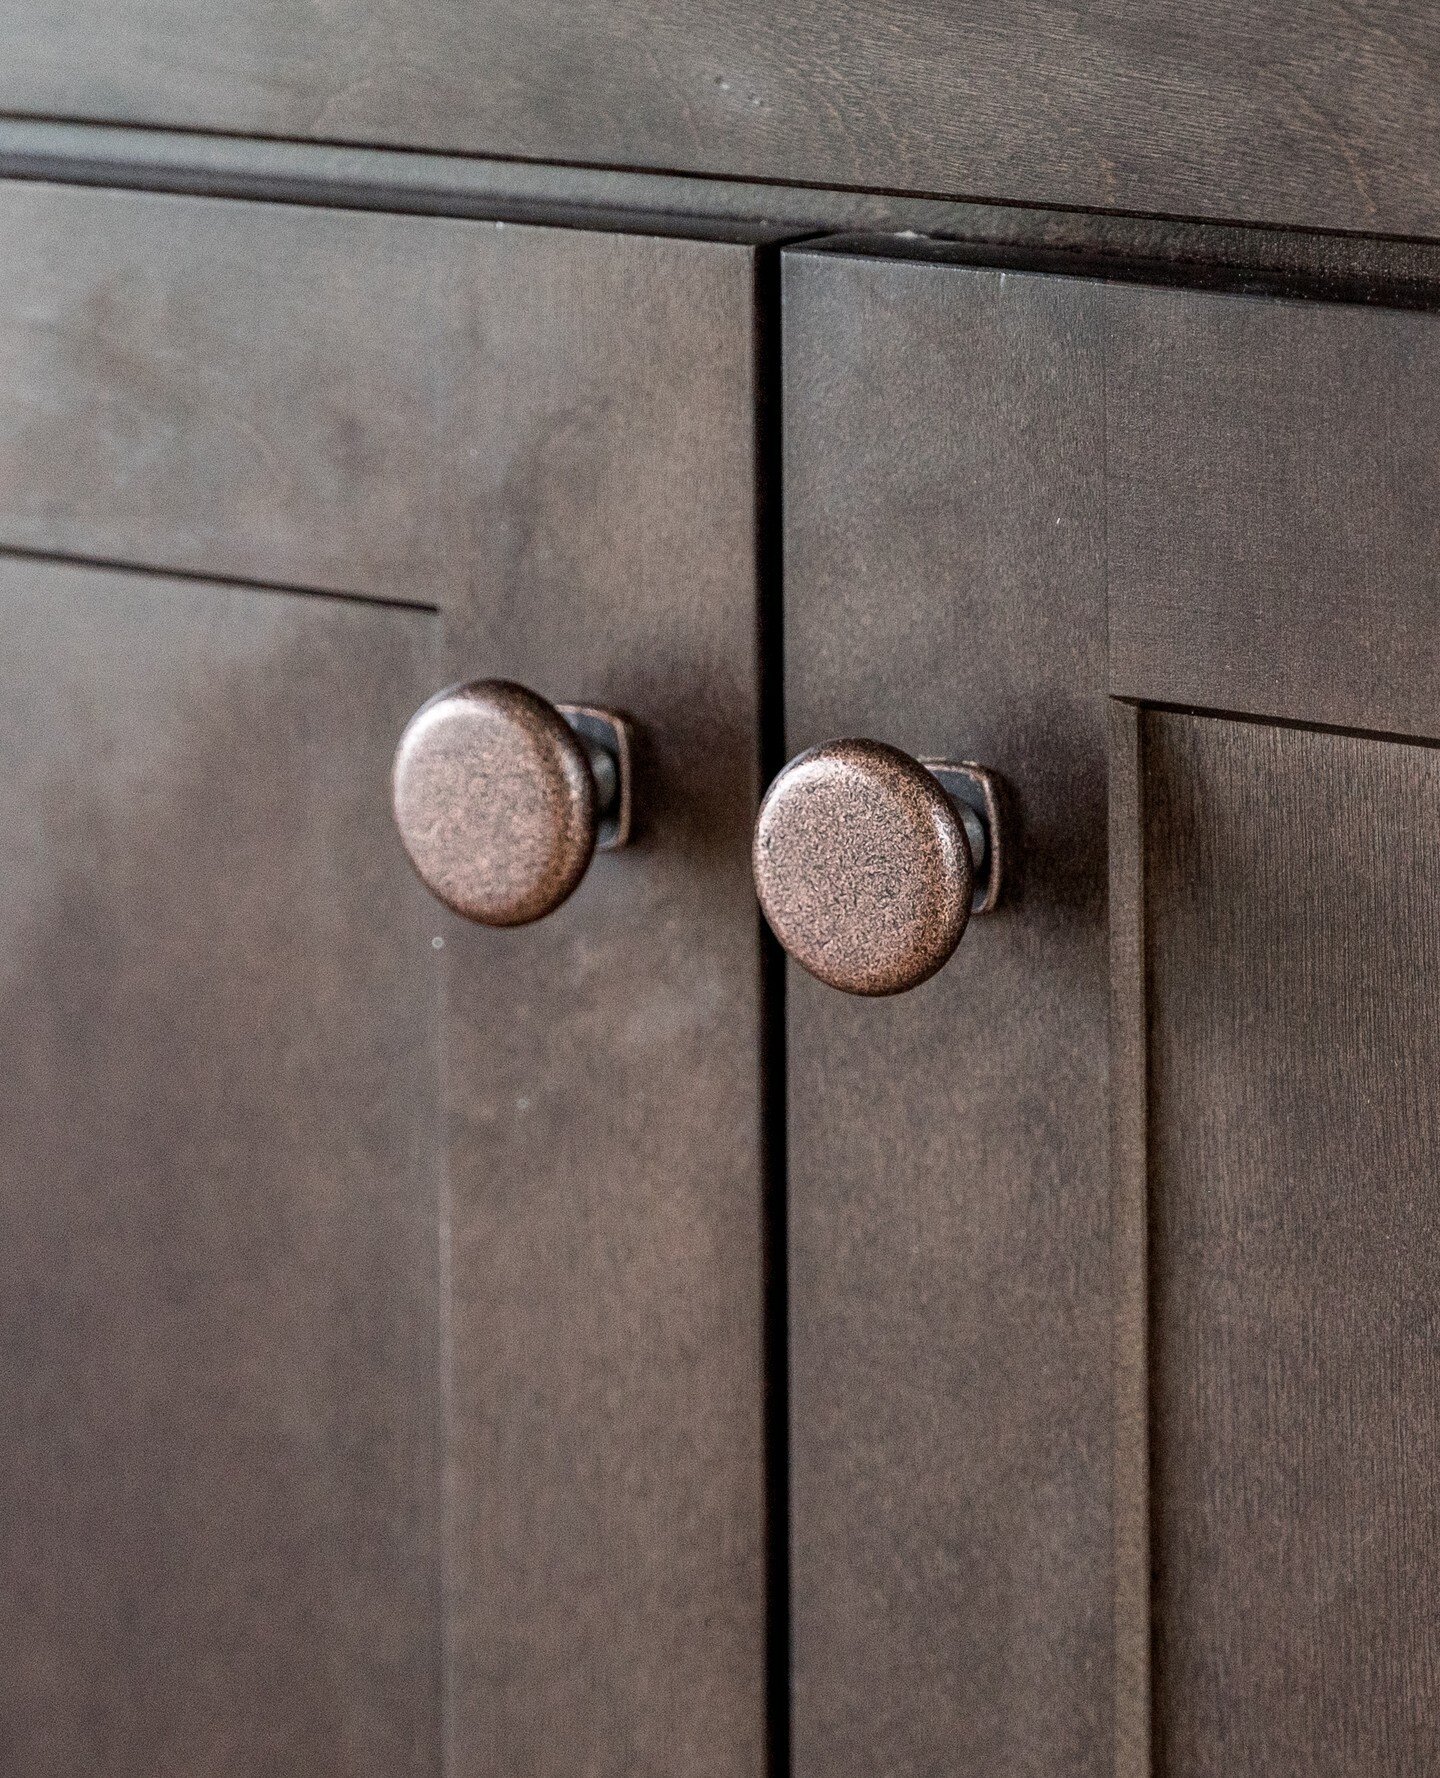 We are obsessed with these dark walnut cabinets paired with rustic hardware that exudes timeless charm and modern sophistication. The deep tones of the walnut create a warm ambiance, while the rustic hardware adds a touch of raw beauty. Do you like t